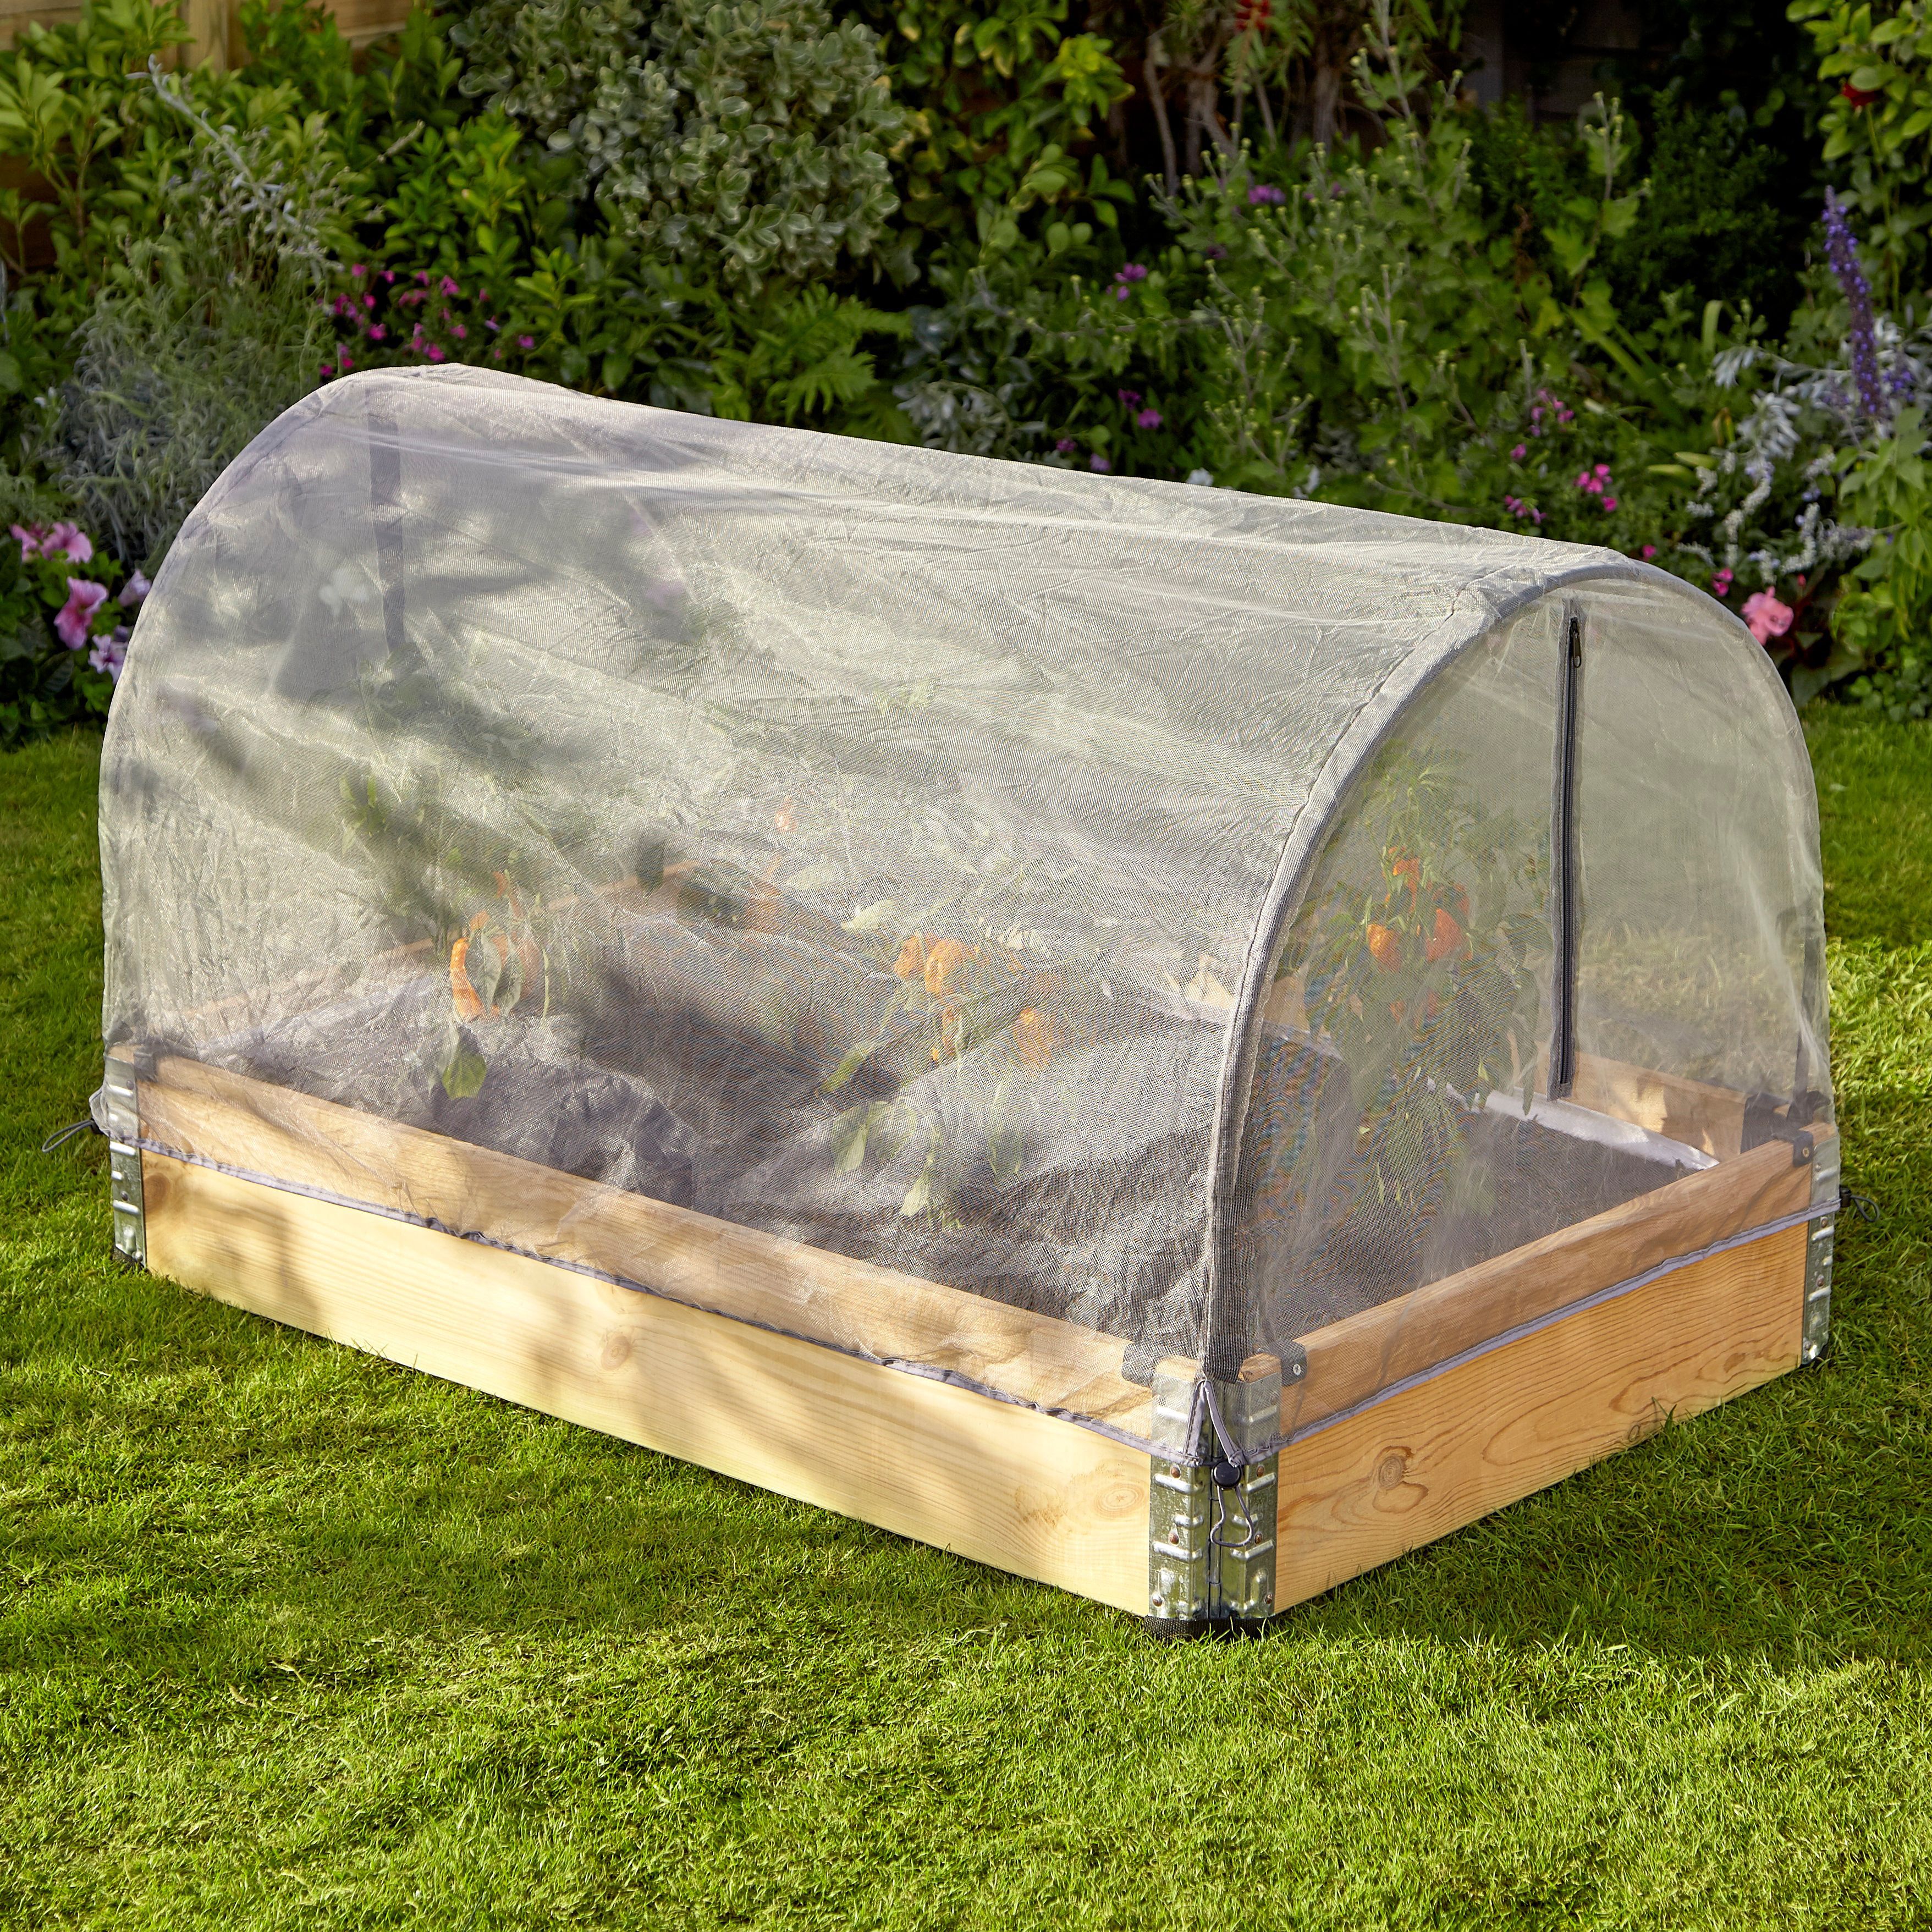 Verve Kitchen garden Large 0.88m² Grow tunnel cover with mesh cover